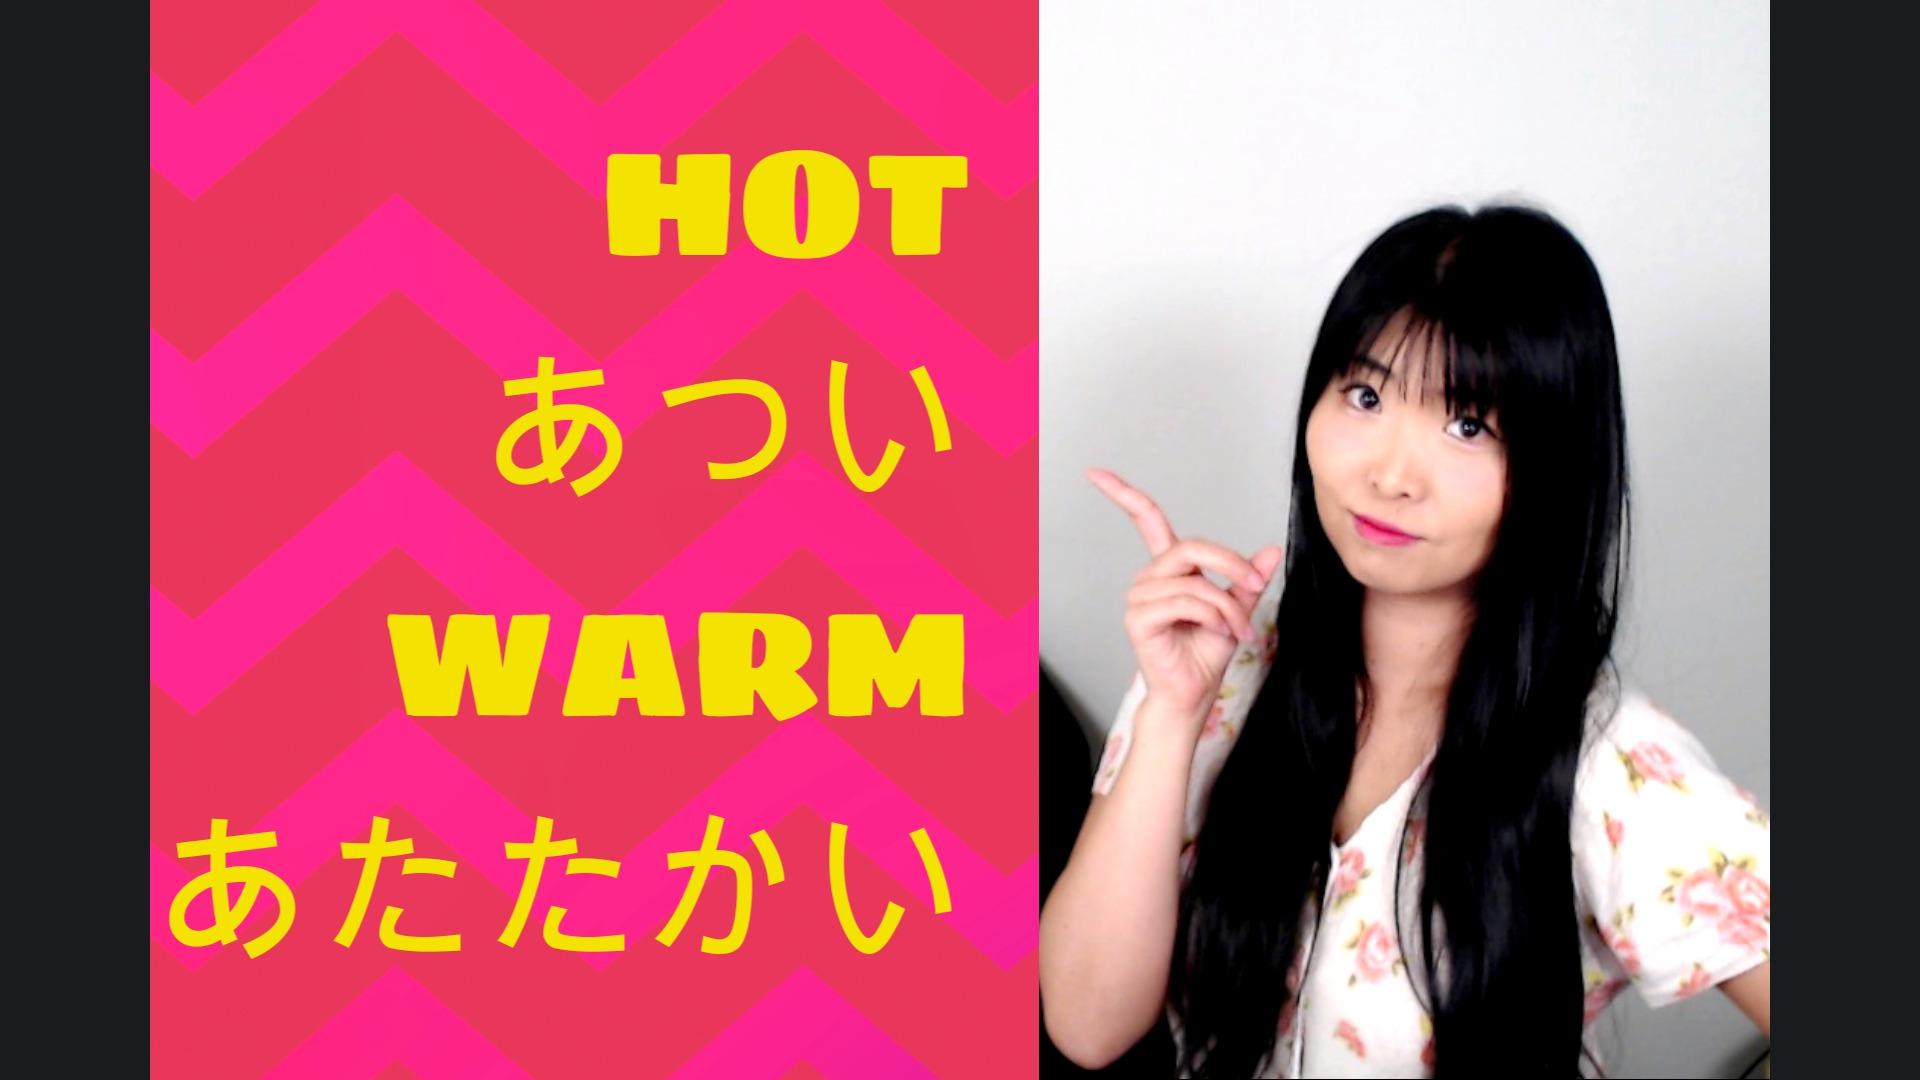 Saying Today Is HOT / WARM in Japanese 